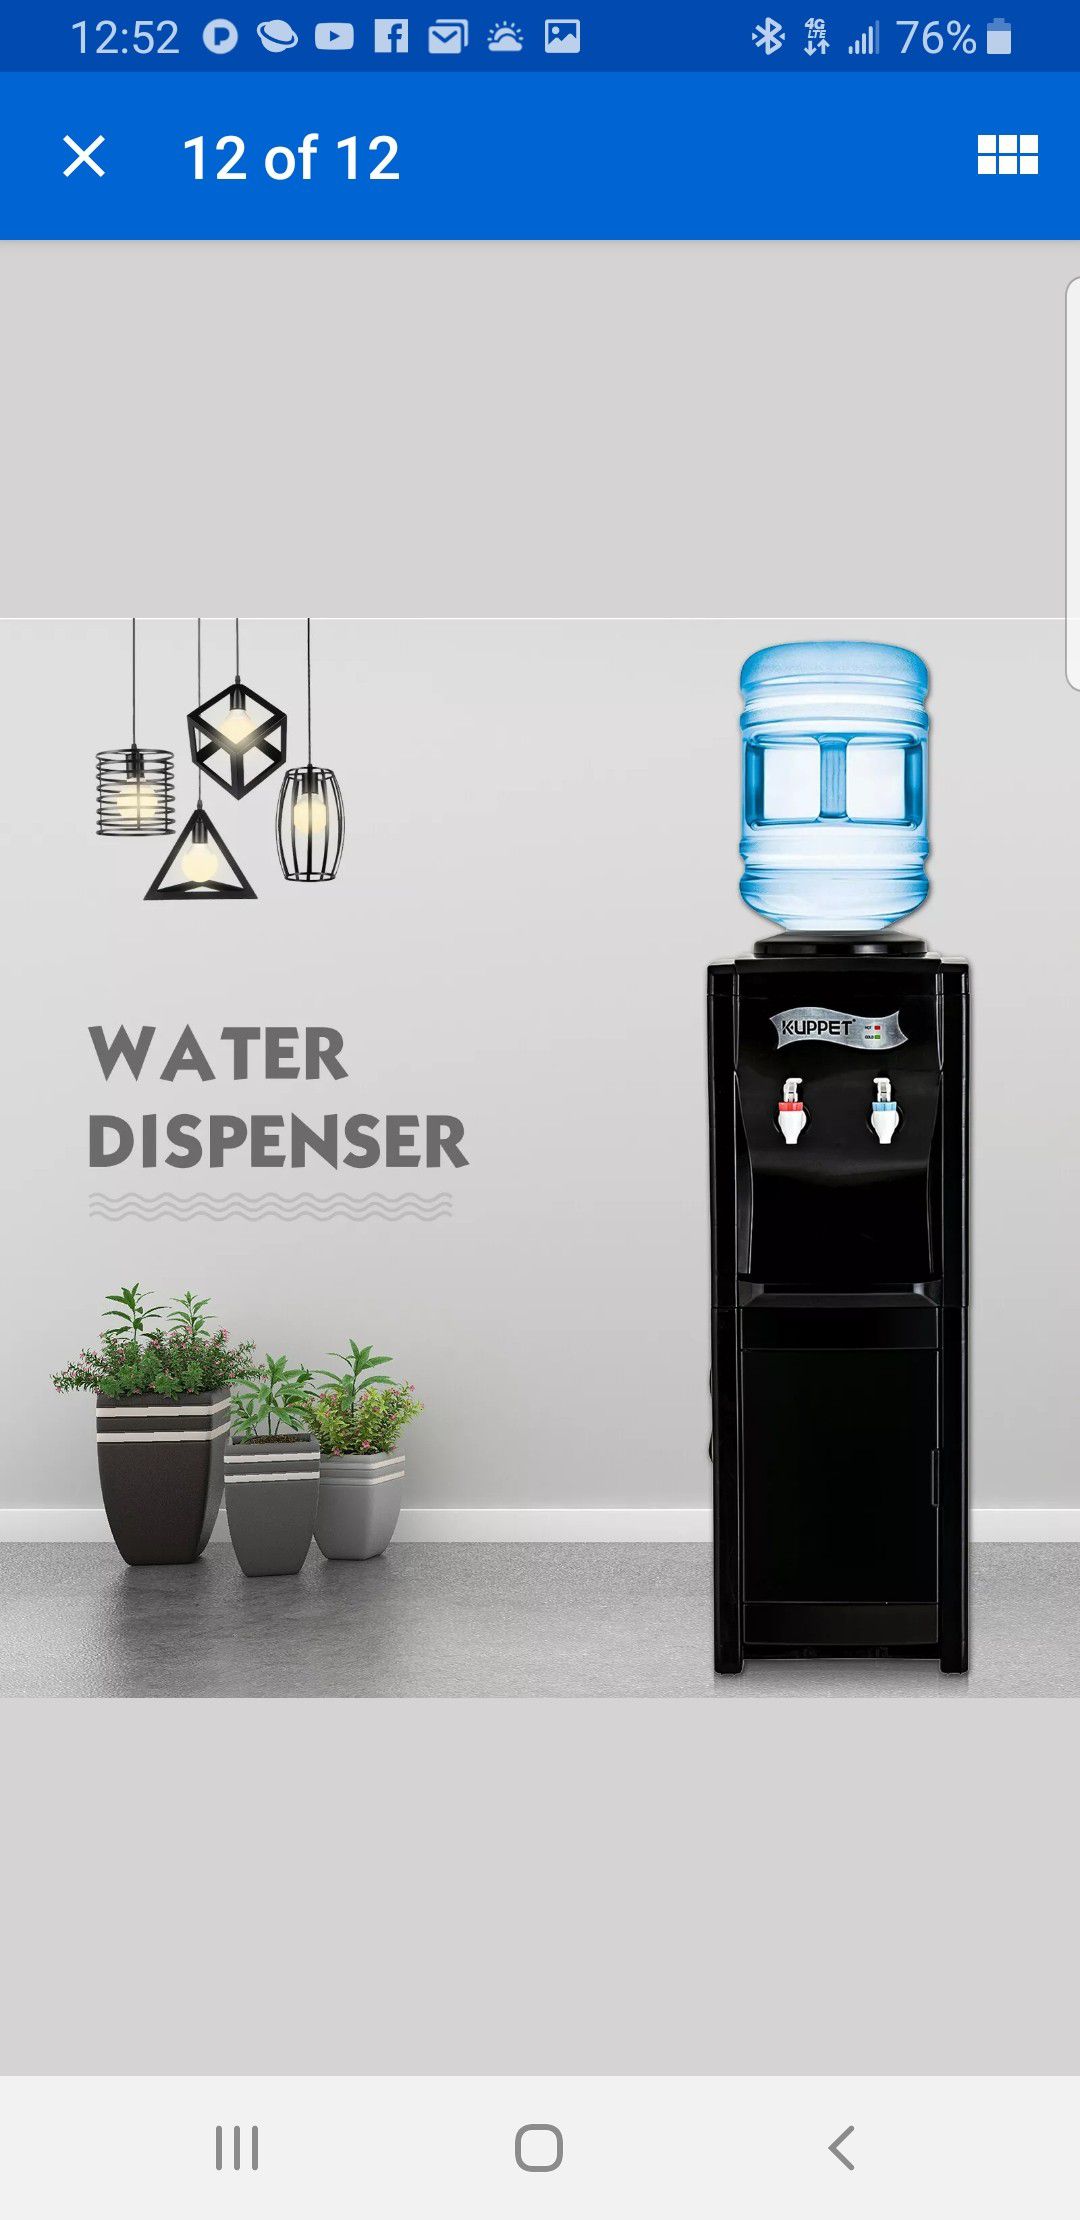 Brand new water cooler and heater for waters and your home or office